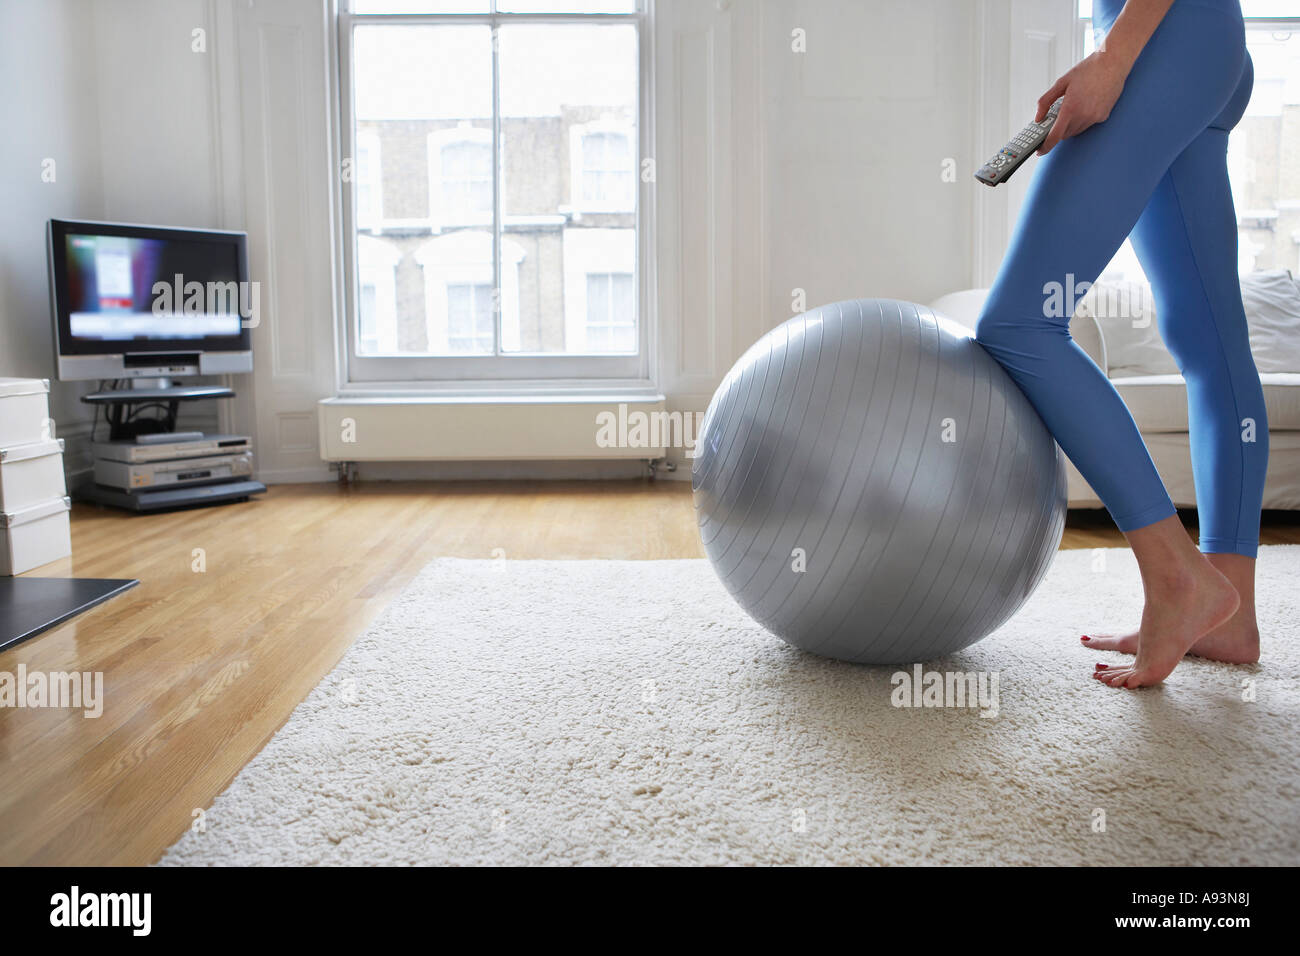 Woman standing at fitness ball, watching television, low section Stock Photo